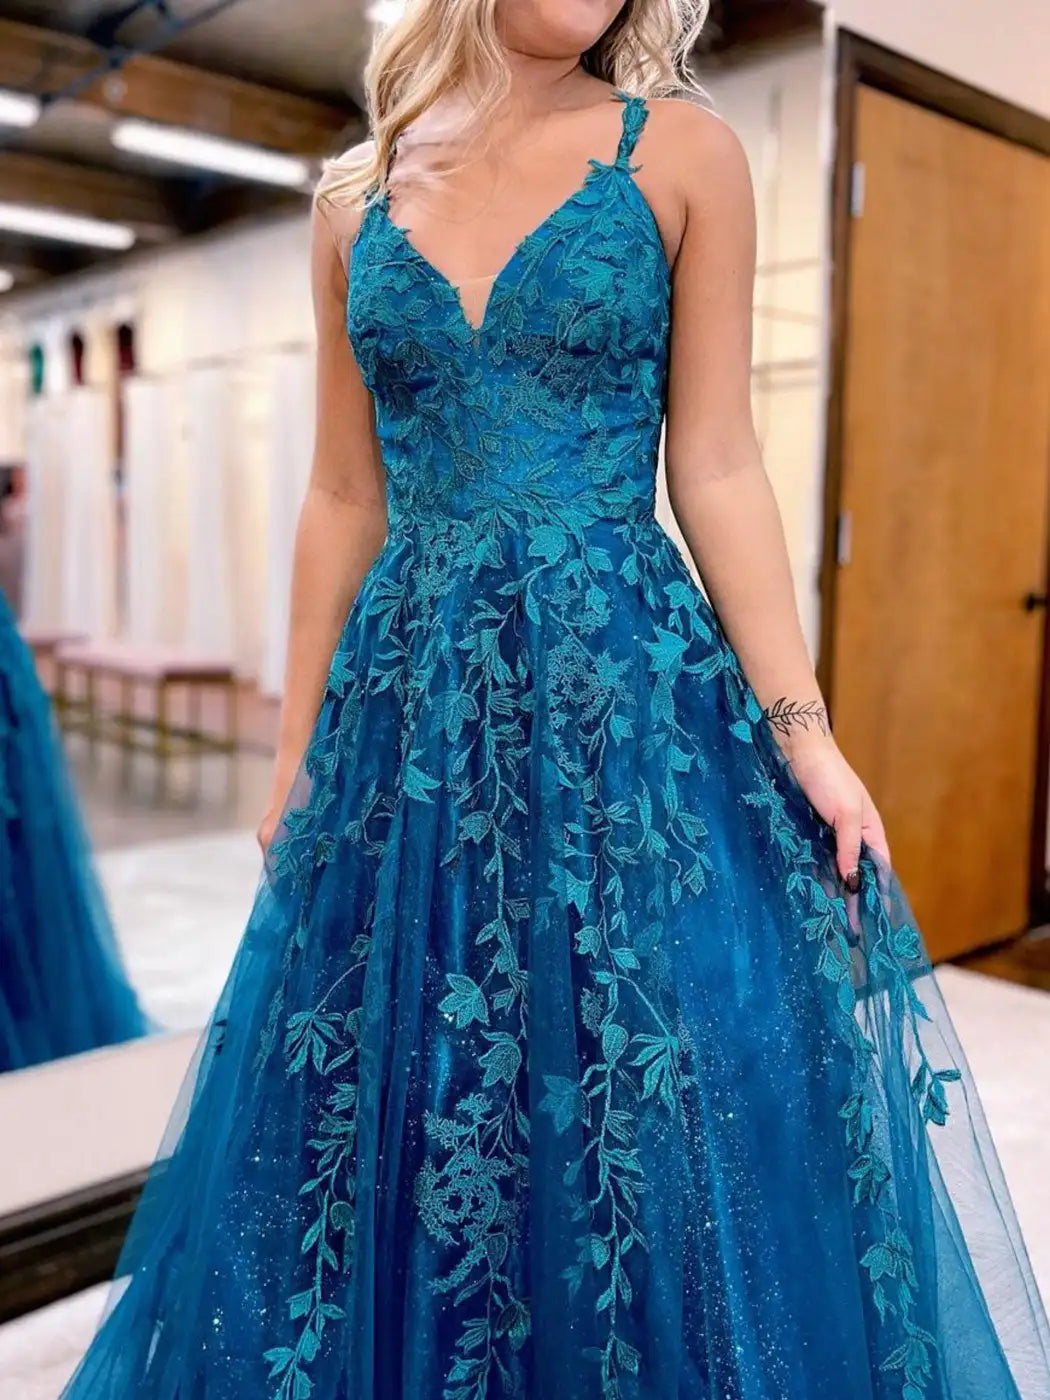 Blue Evening Dresses Lace Applique with Glitters Tulle V-neck Spaghetti Strap A Line Corset Back Formal Party Prom Gowns